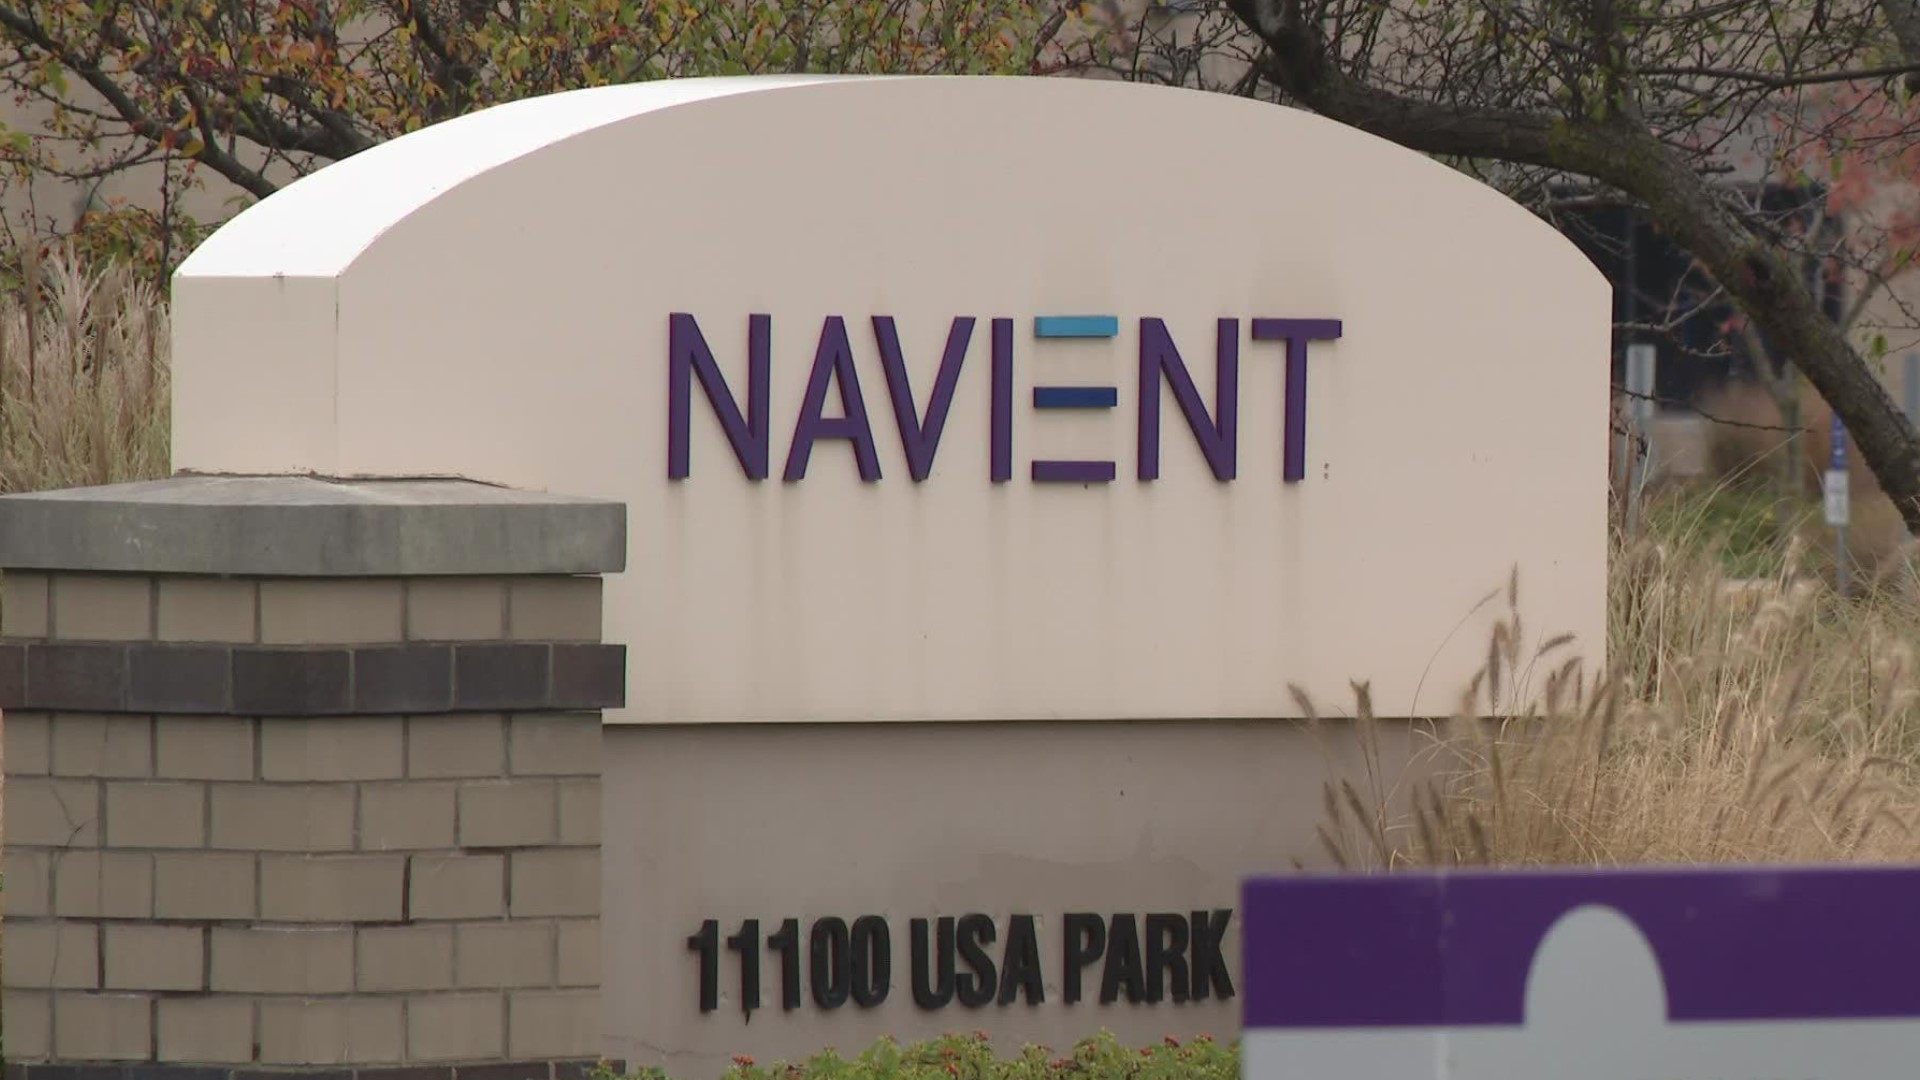 Navient will cancel more than $1 billion in student loan debt through a settlement with states' attorneys general. Here's how to find out if your debt is one of them